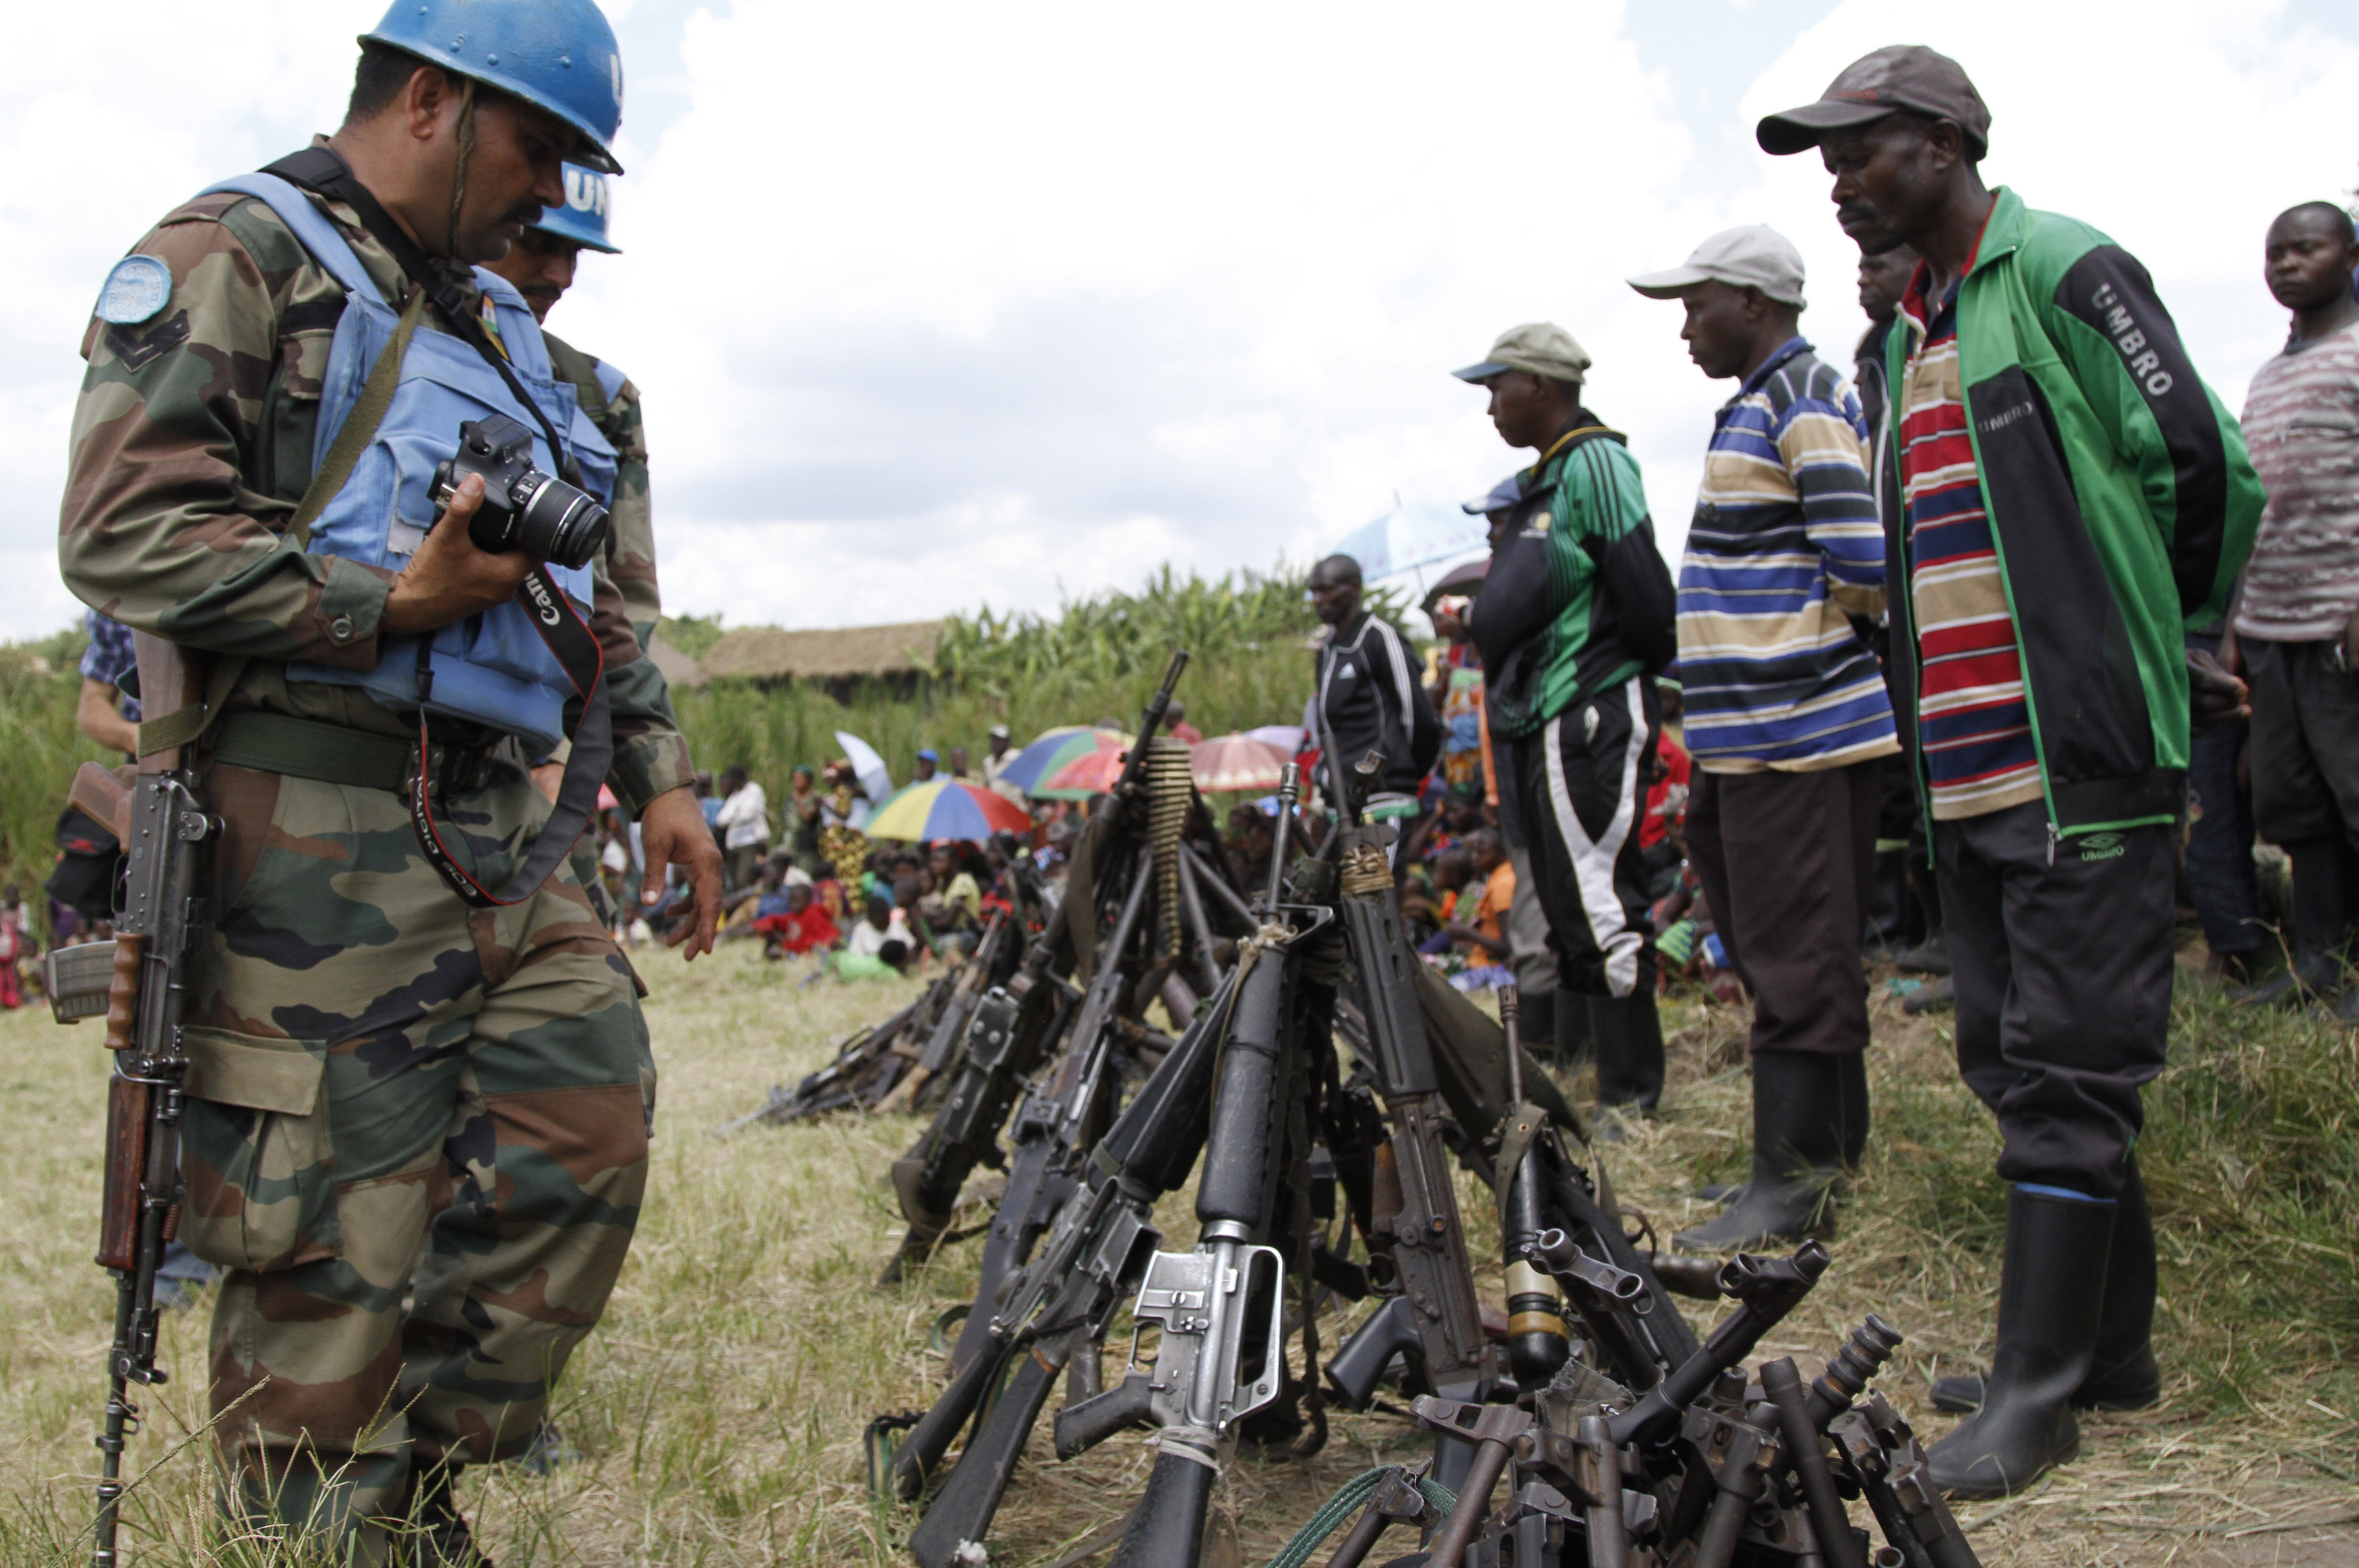 United Nations peace keepers record details of weapons recovered from the Democratic Forces for the Liberation of Rwanda (FDLR) militants after their surrender in Kateku